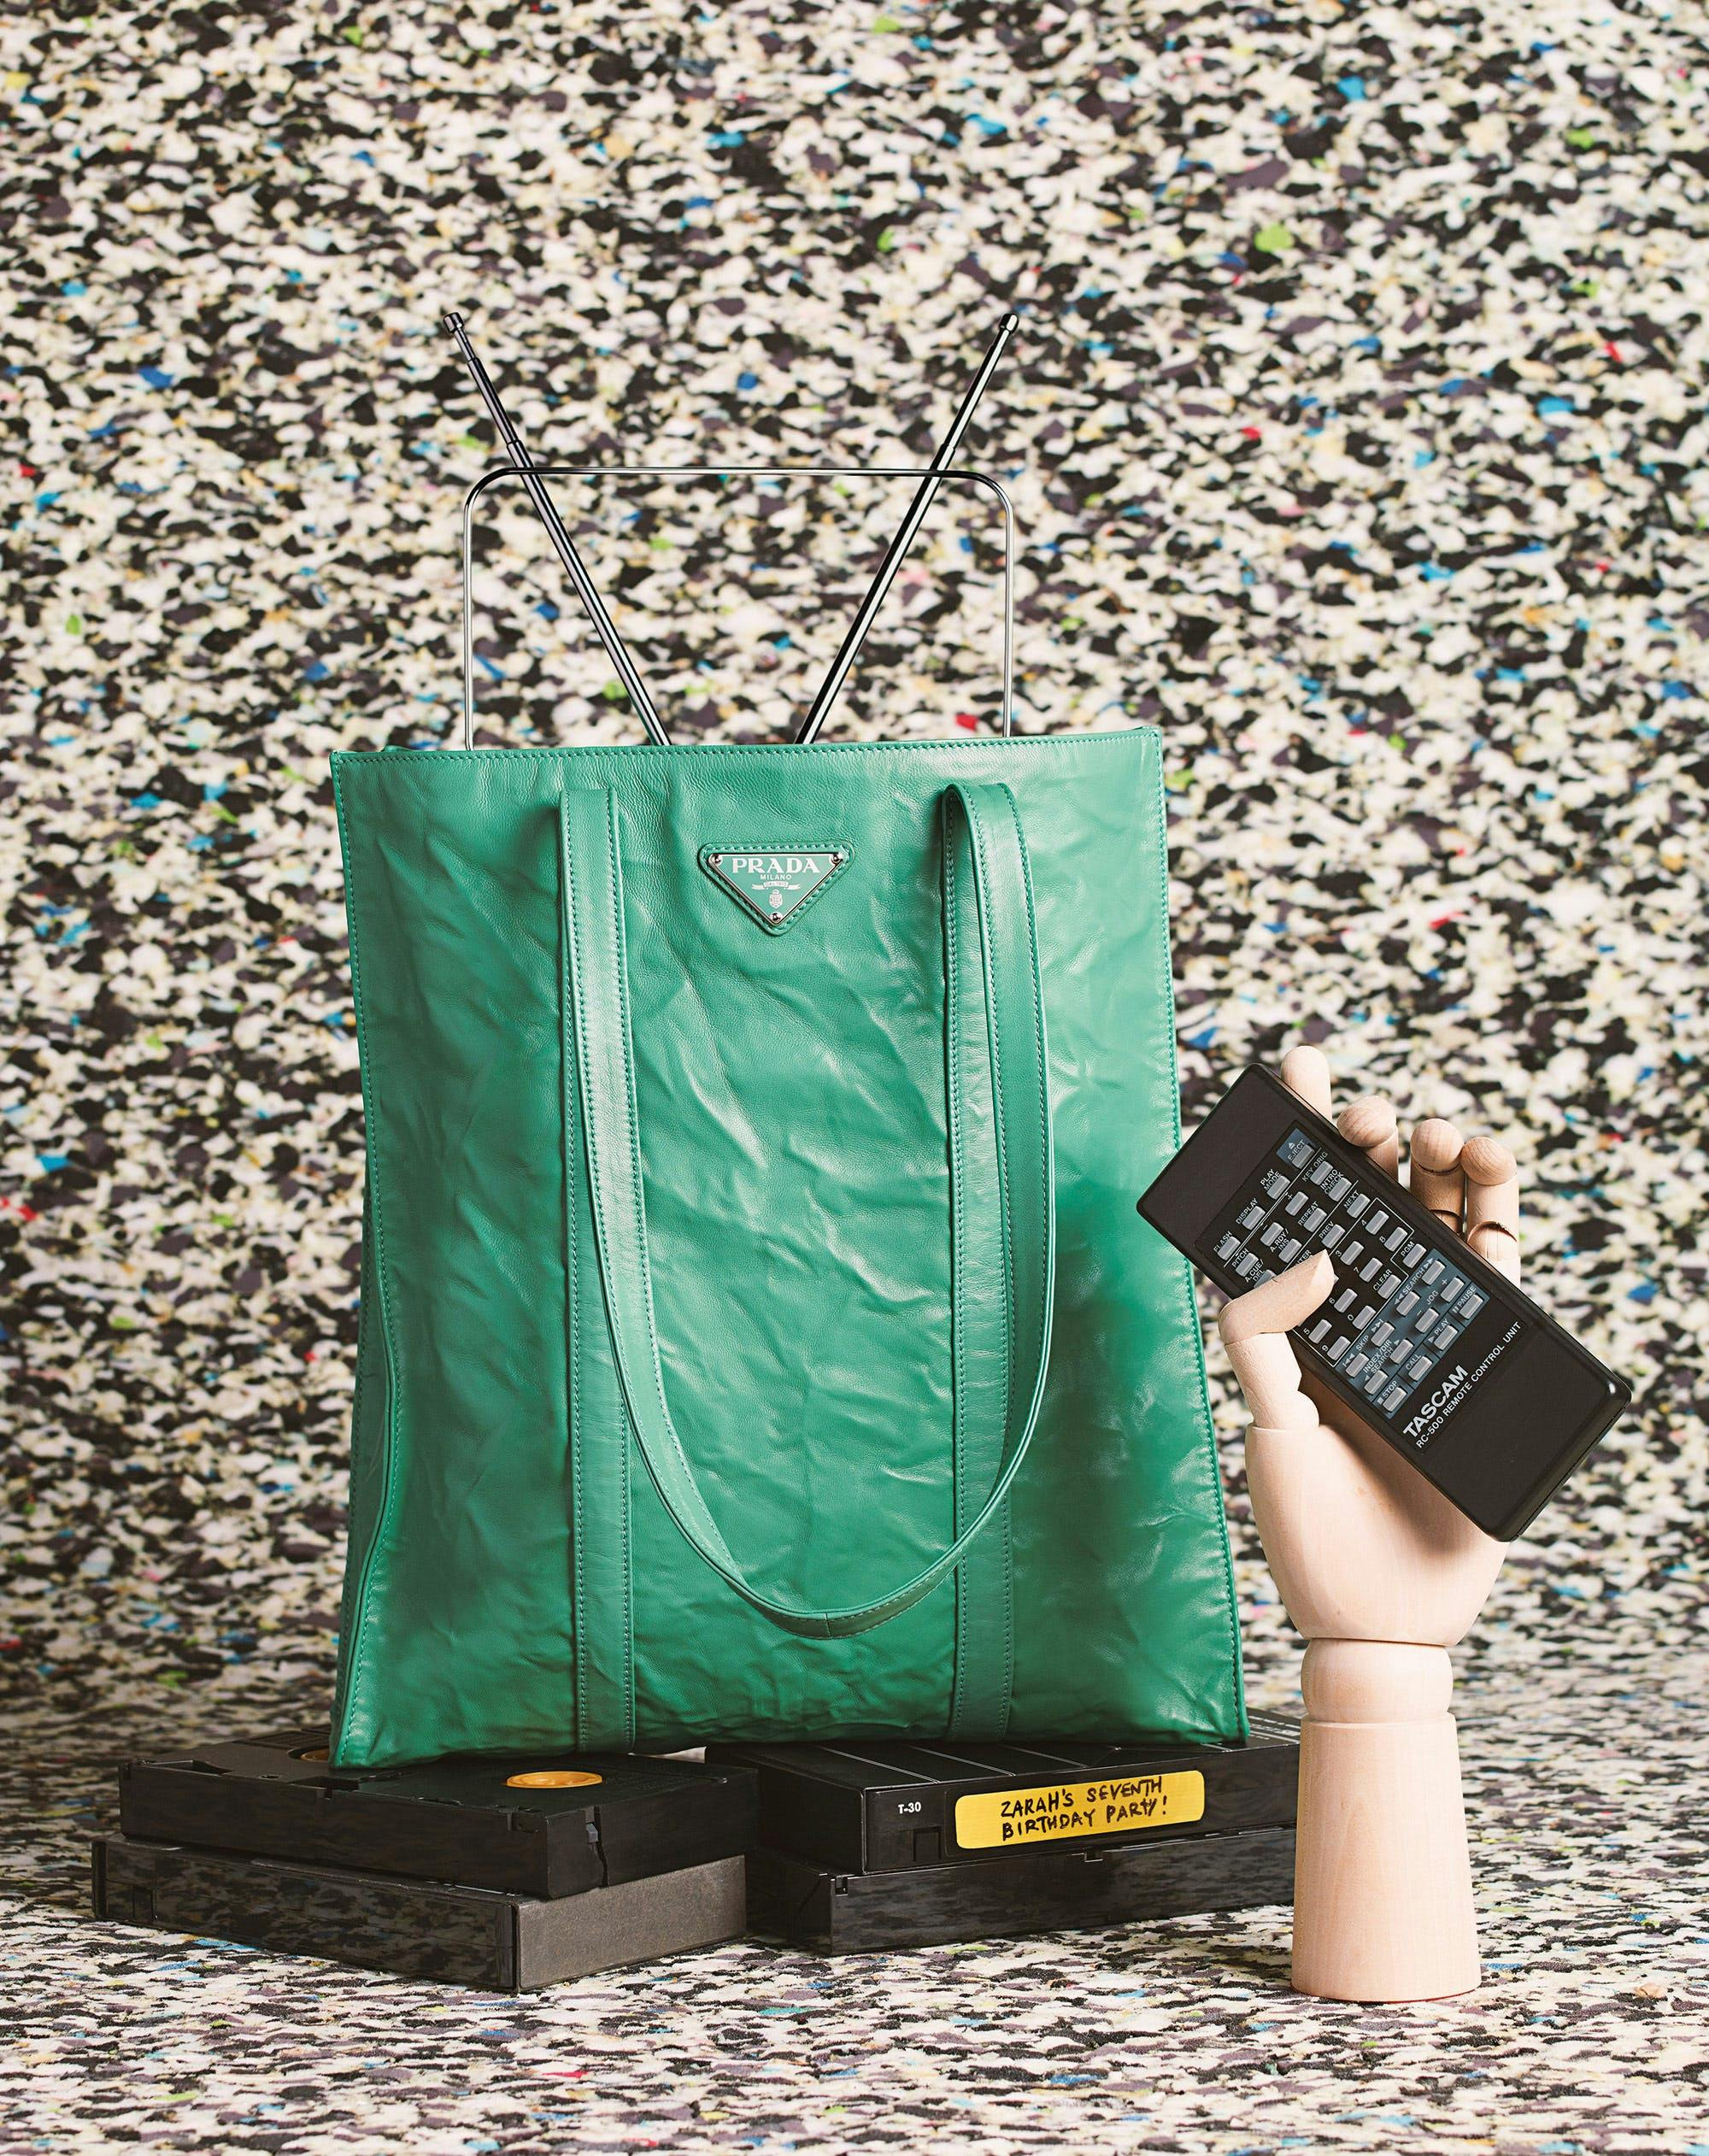 Green bag hand holding remote marble background